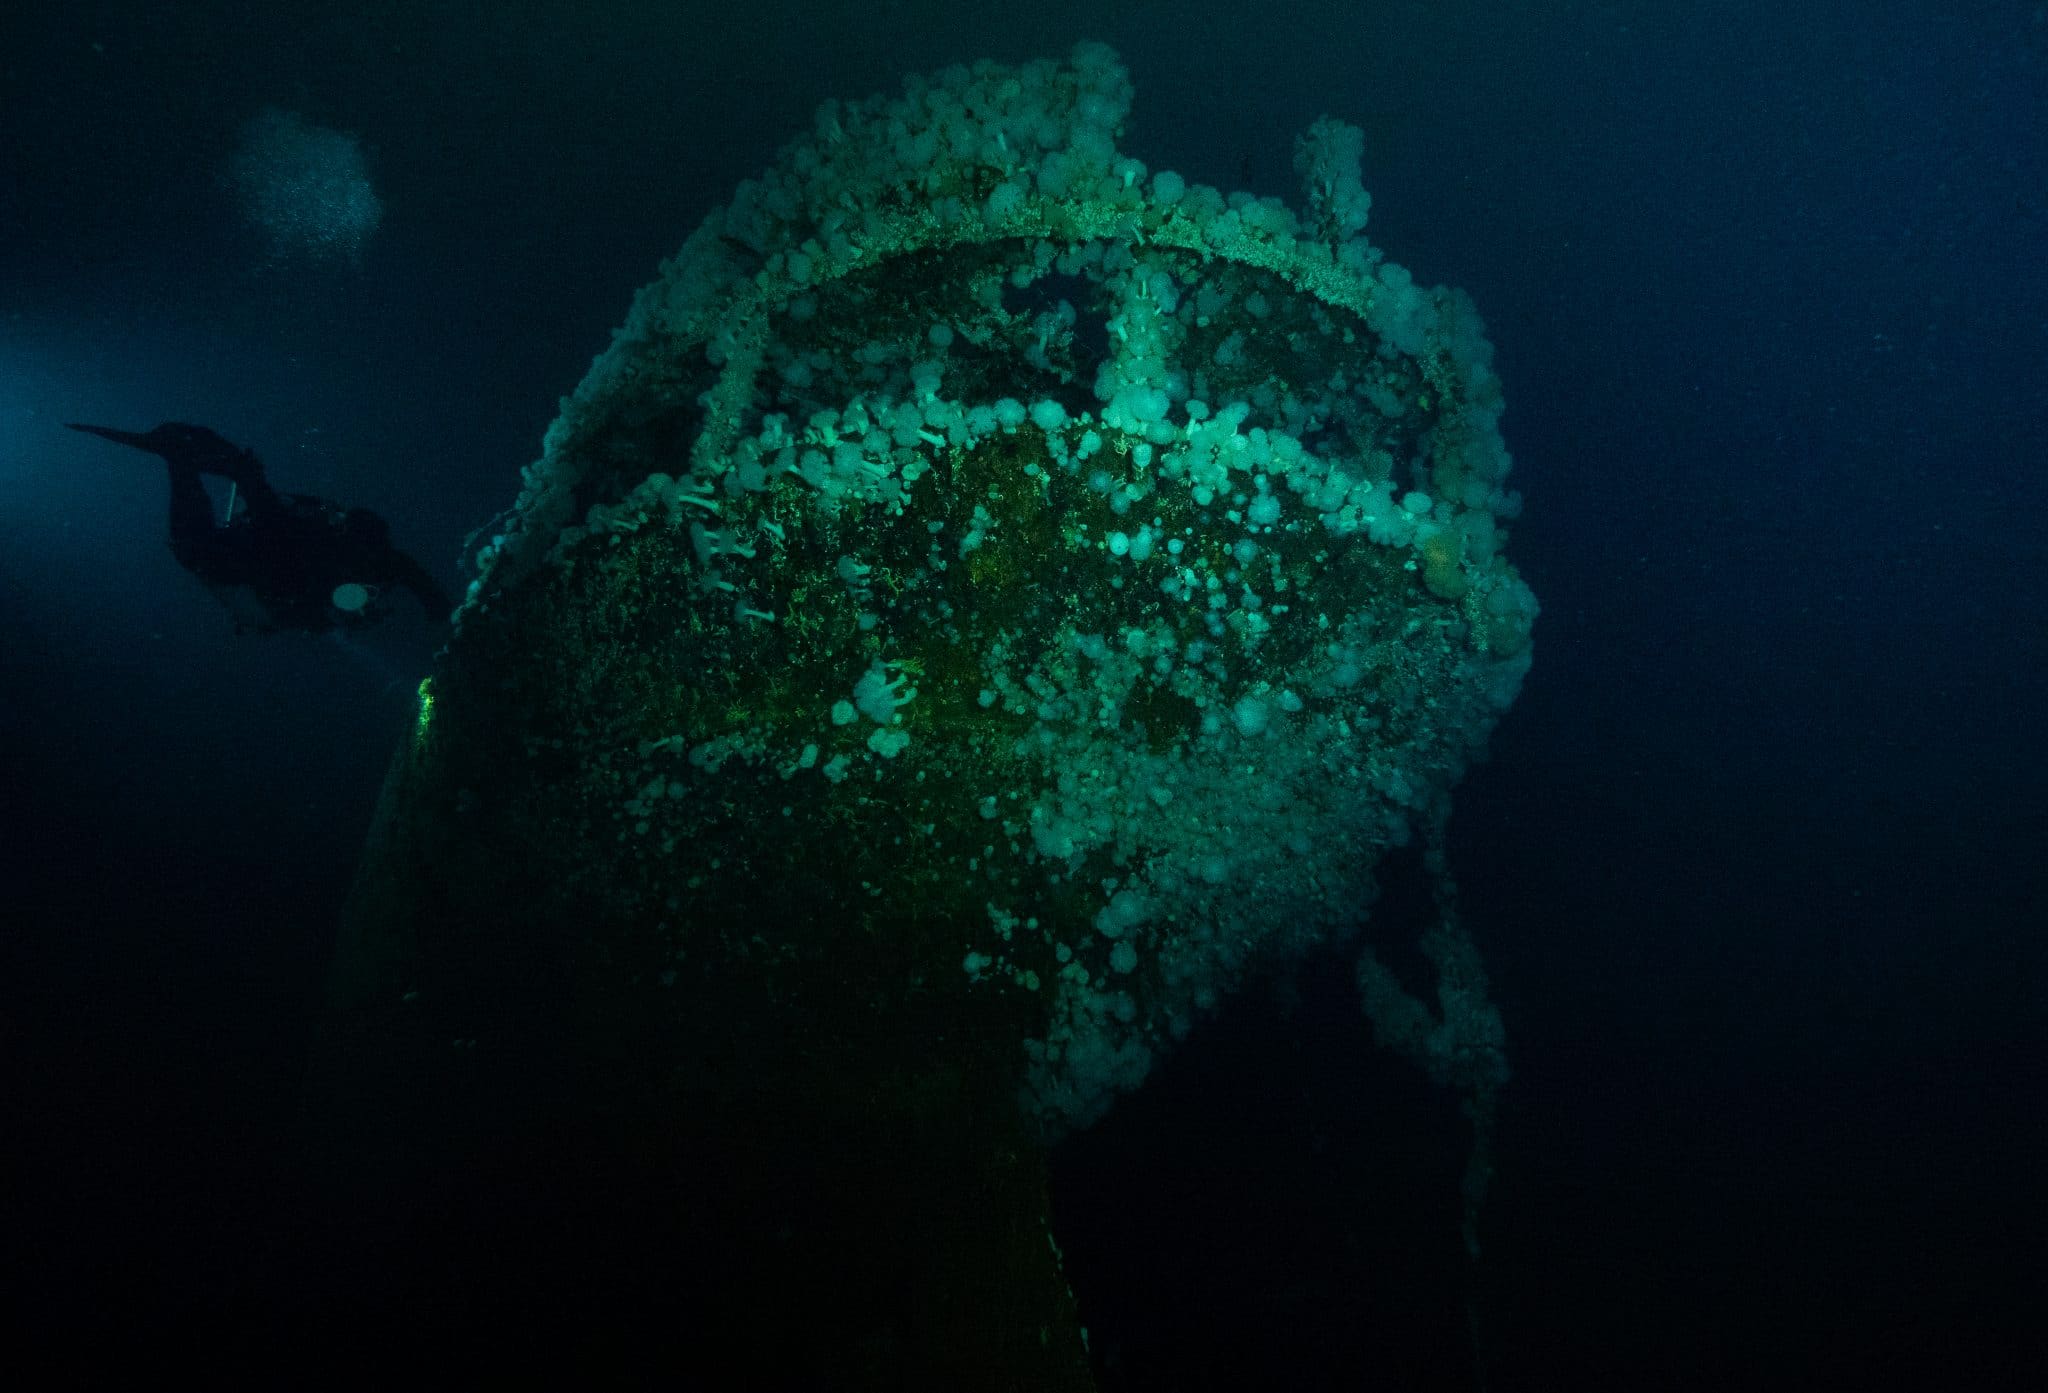 Dive to the Wreck of the Brenton Reef Lightship, LV39 